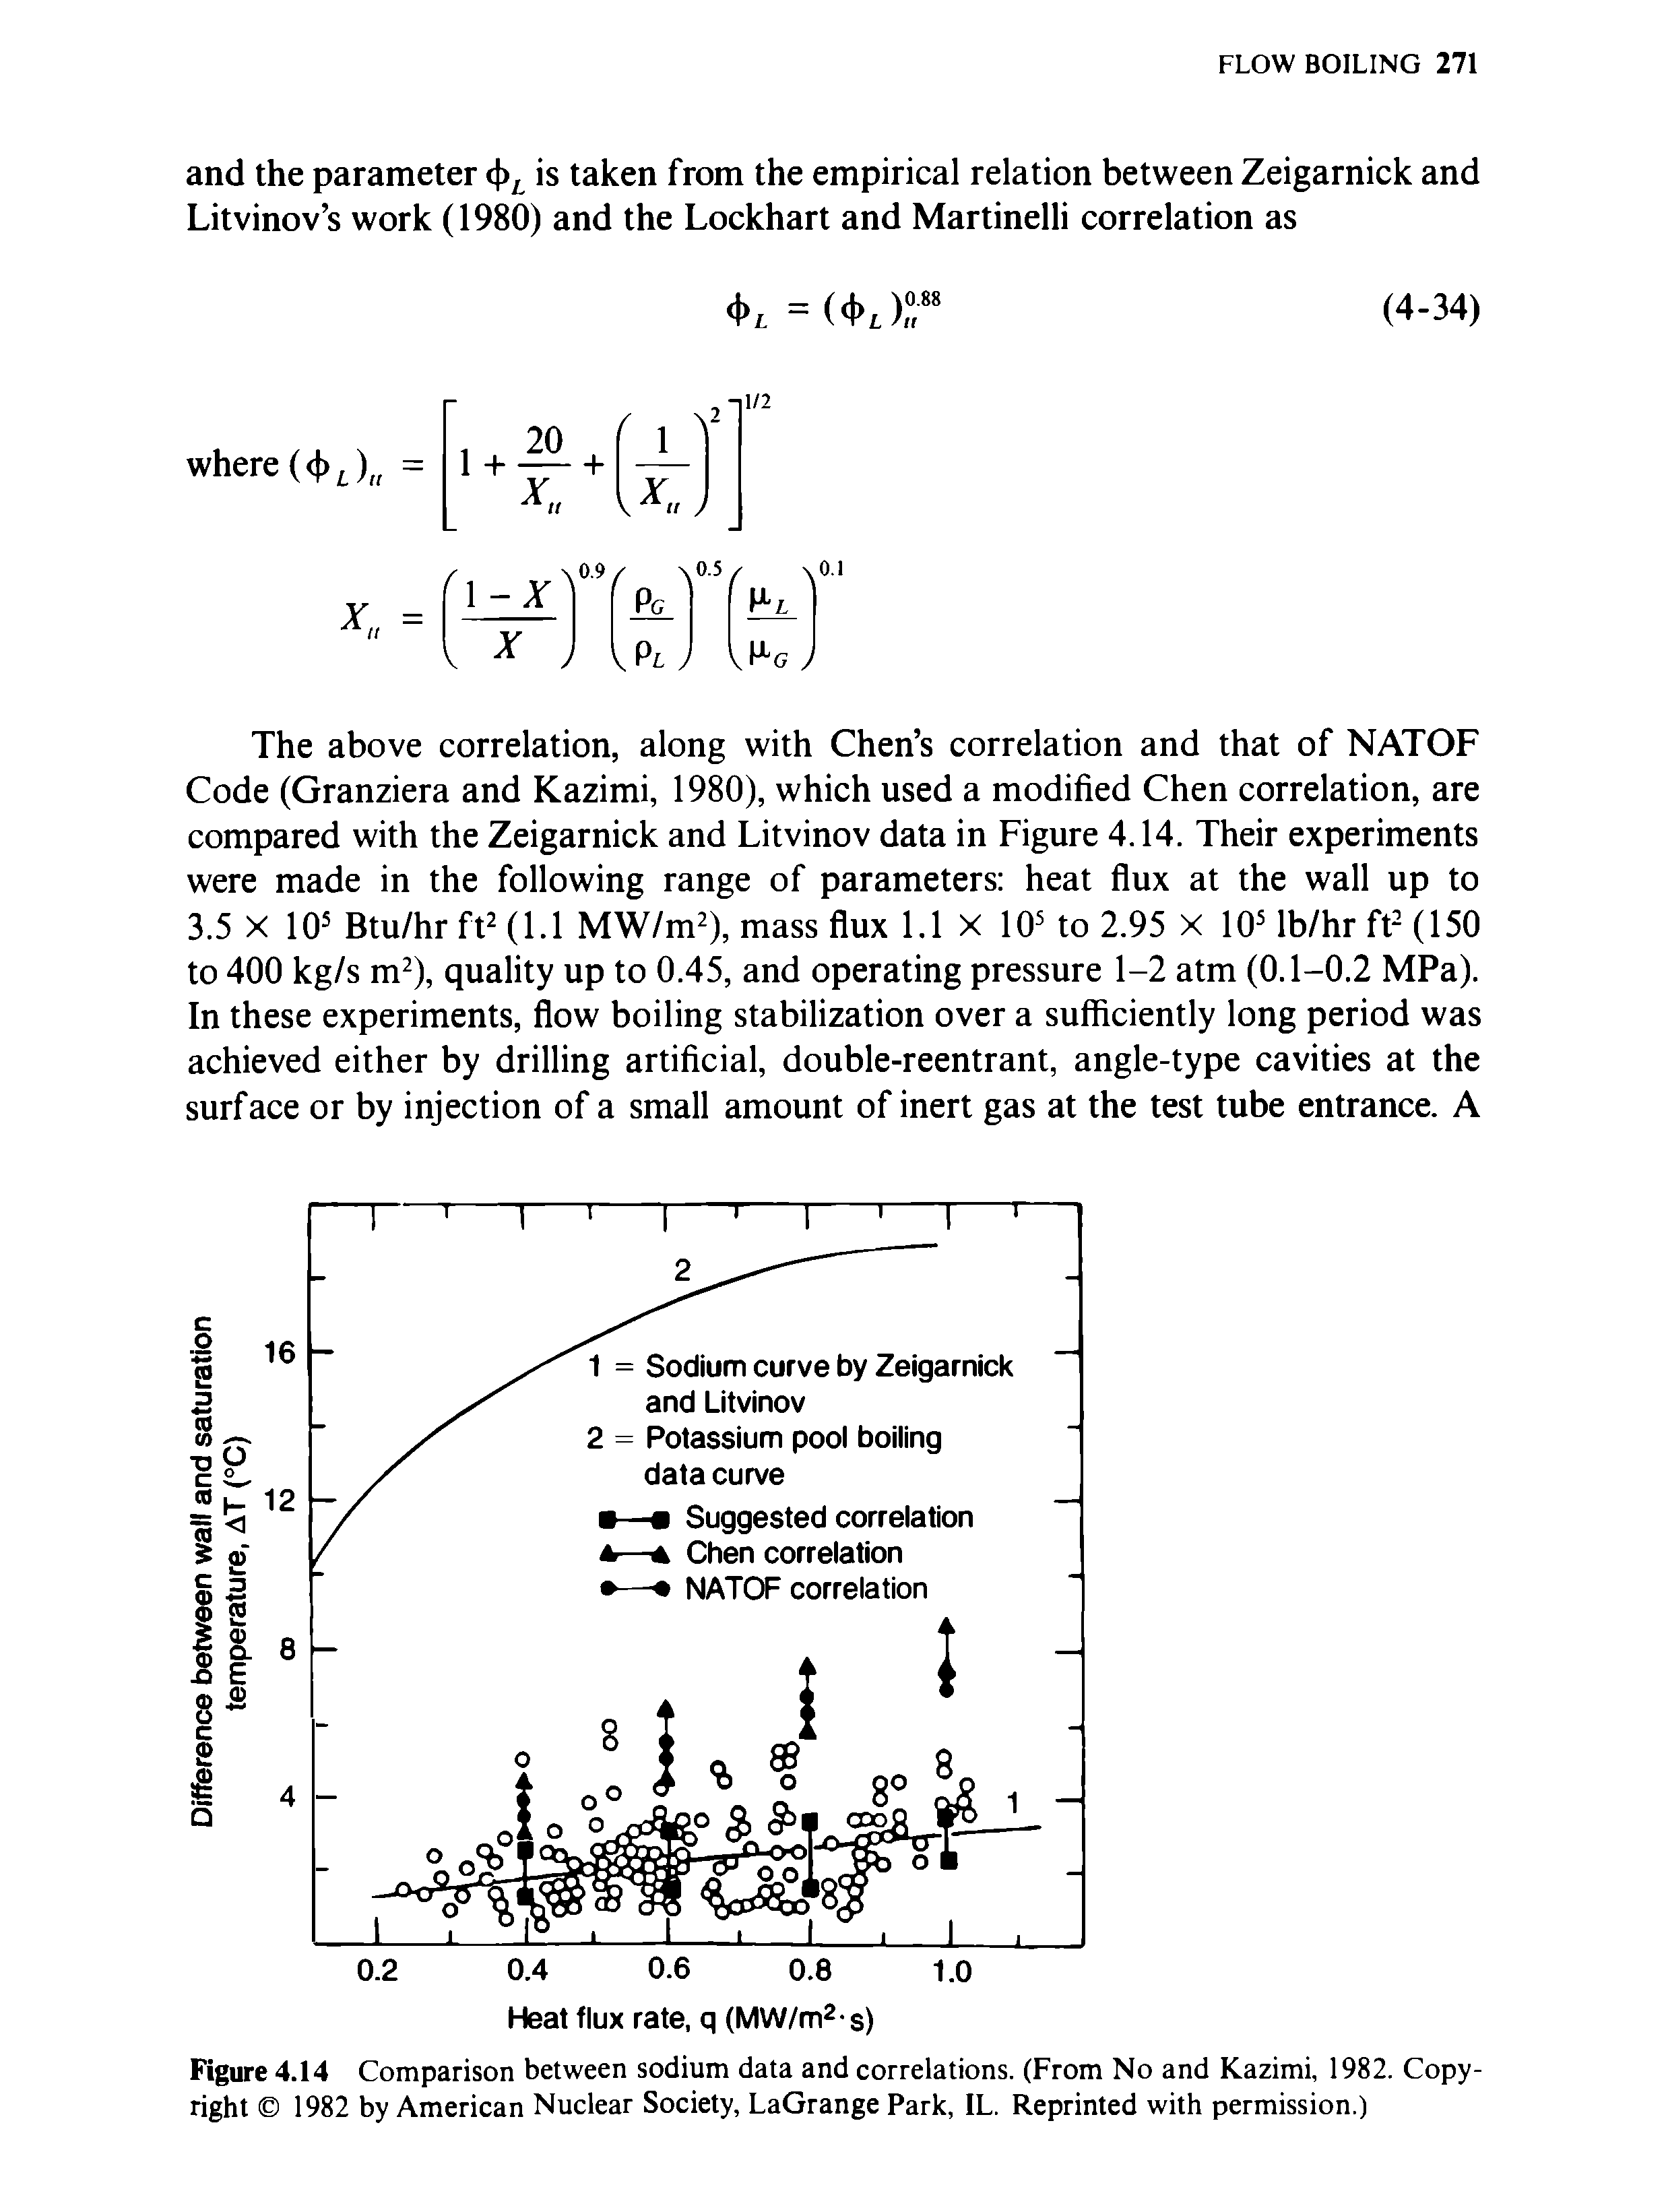 Figure 4.14 Comparison between sodium data and correlations. (From No and Kazimi, 1982. Copyright 1982 by American Nuclear Society, LaGrange Park, IL. Reprinted with permission.)...